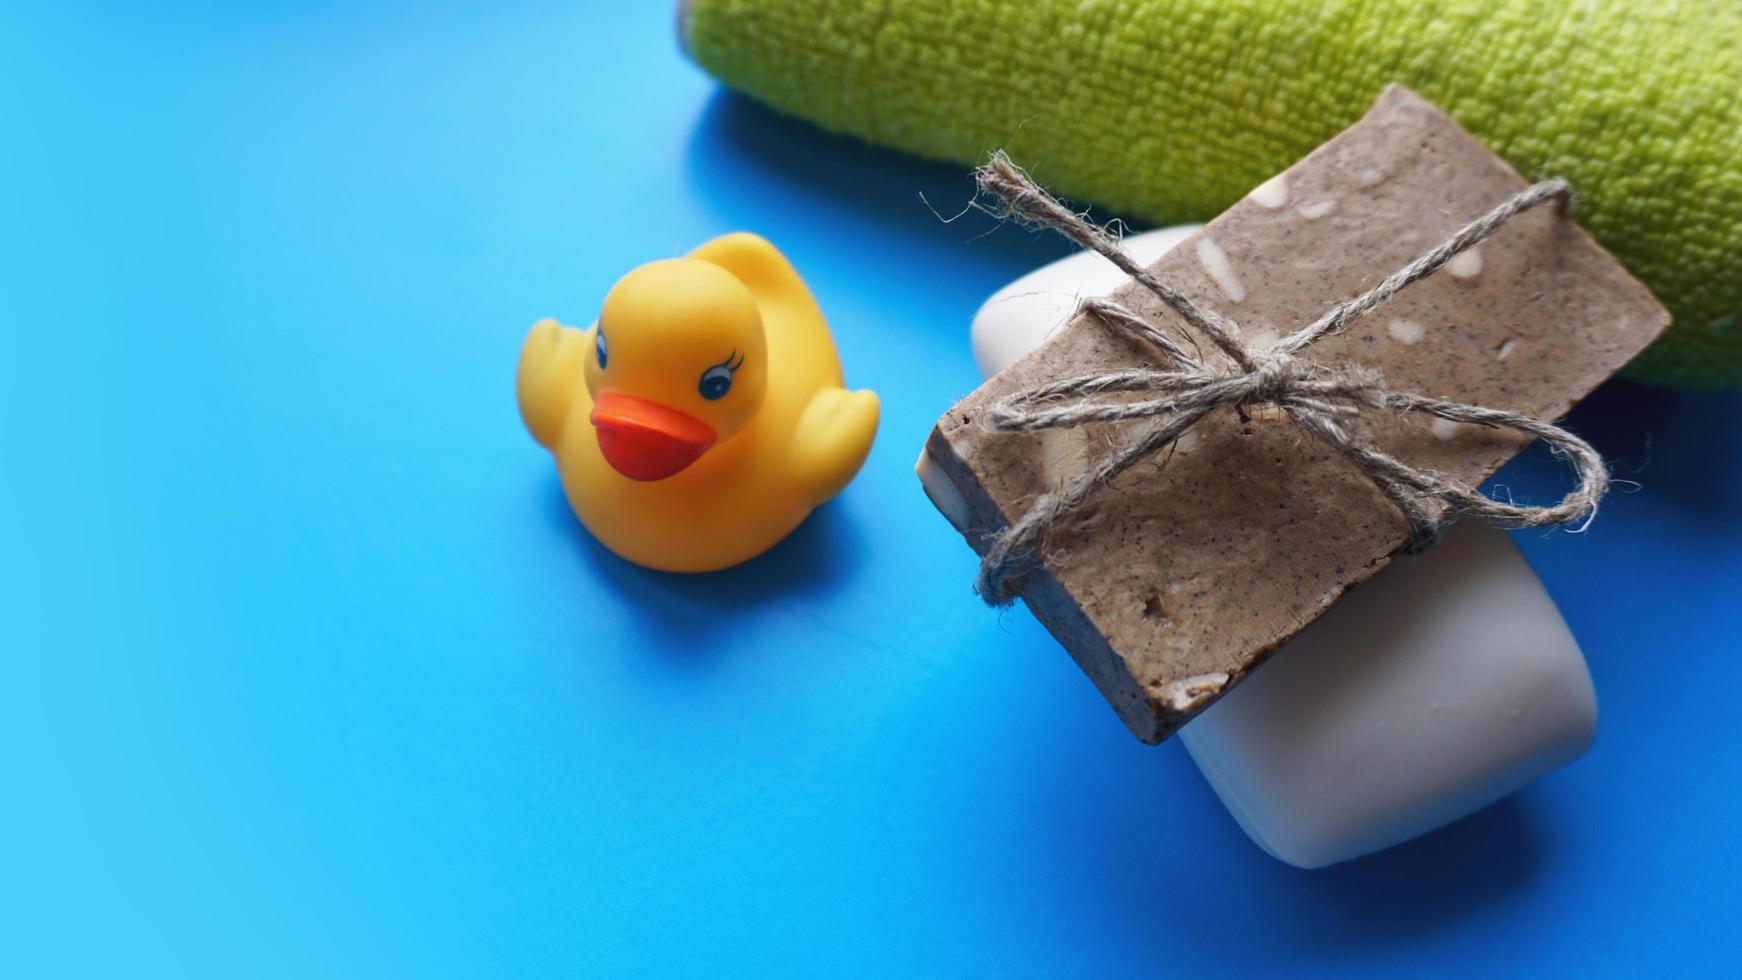 Towel, soap and yellow toy duck on a blue background photo